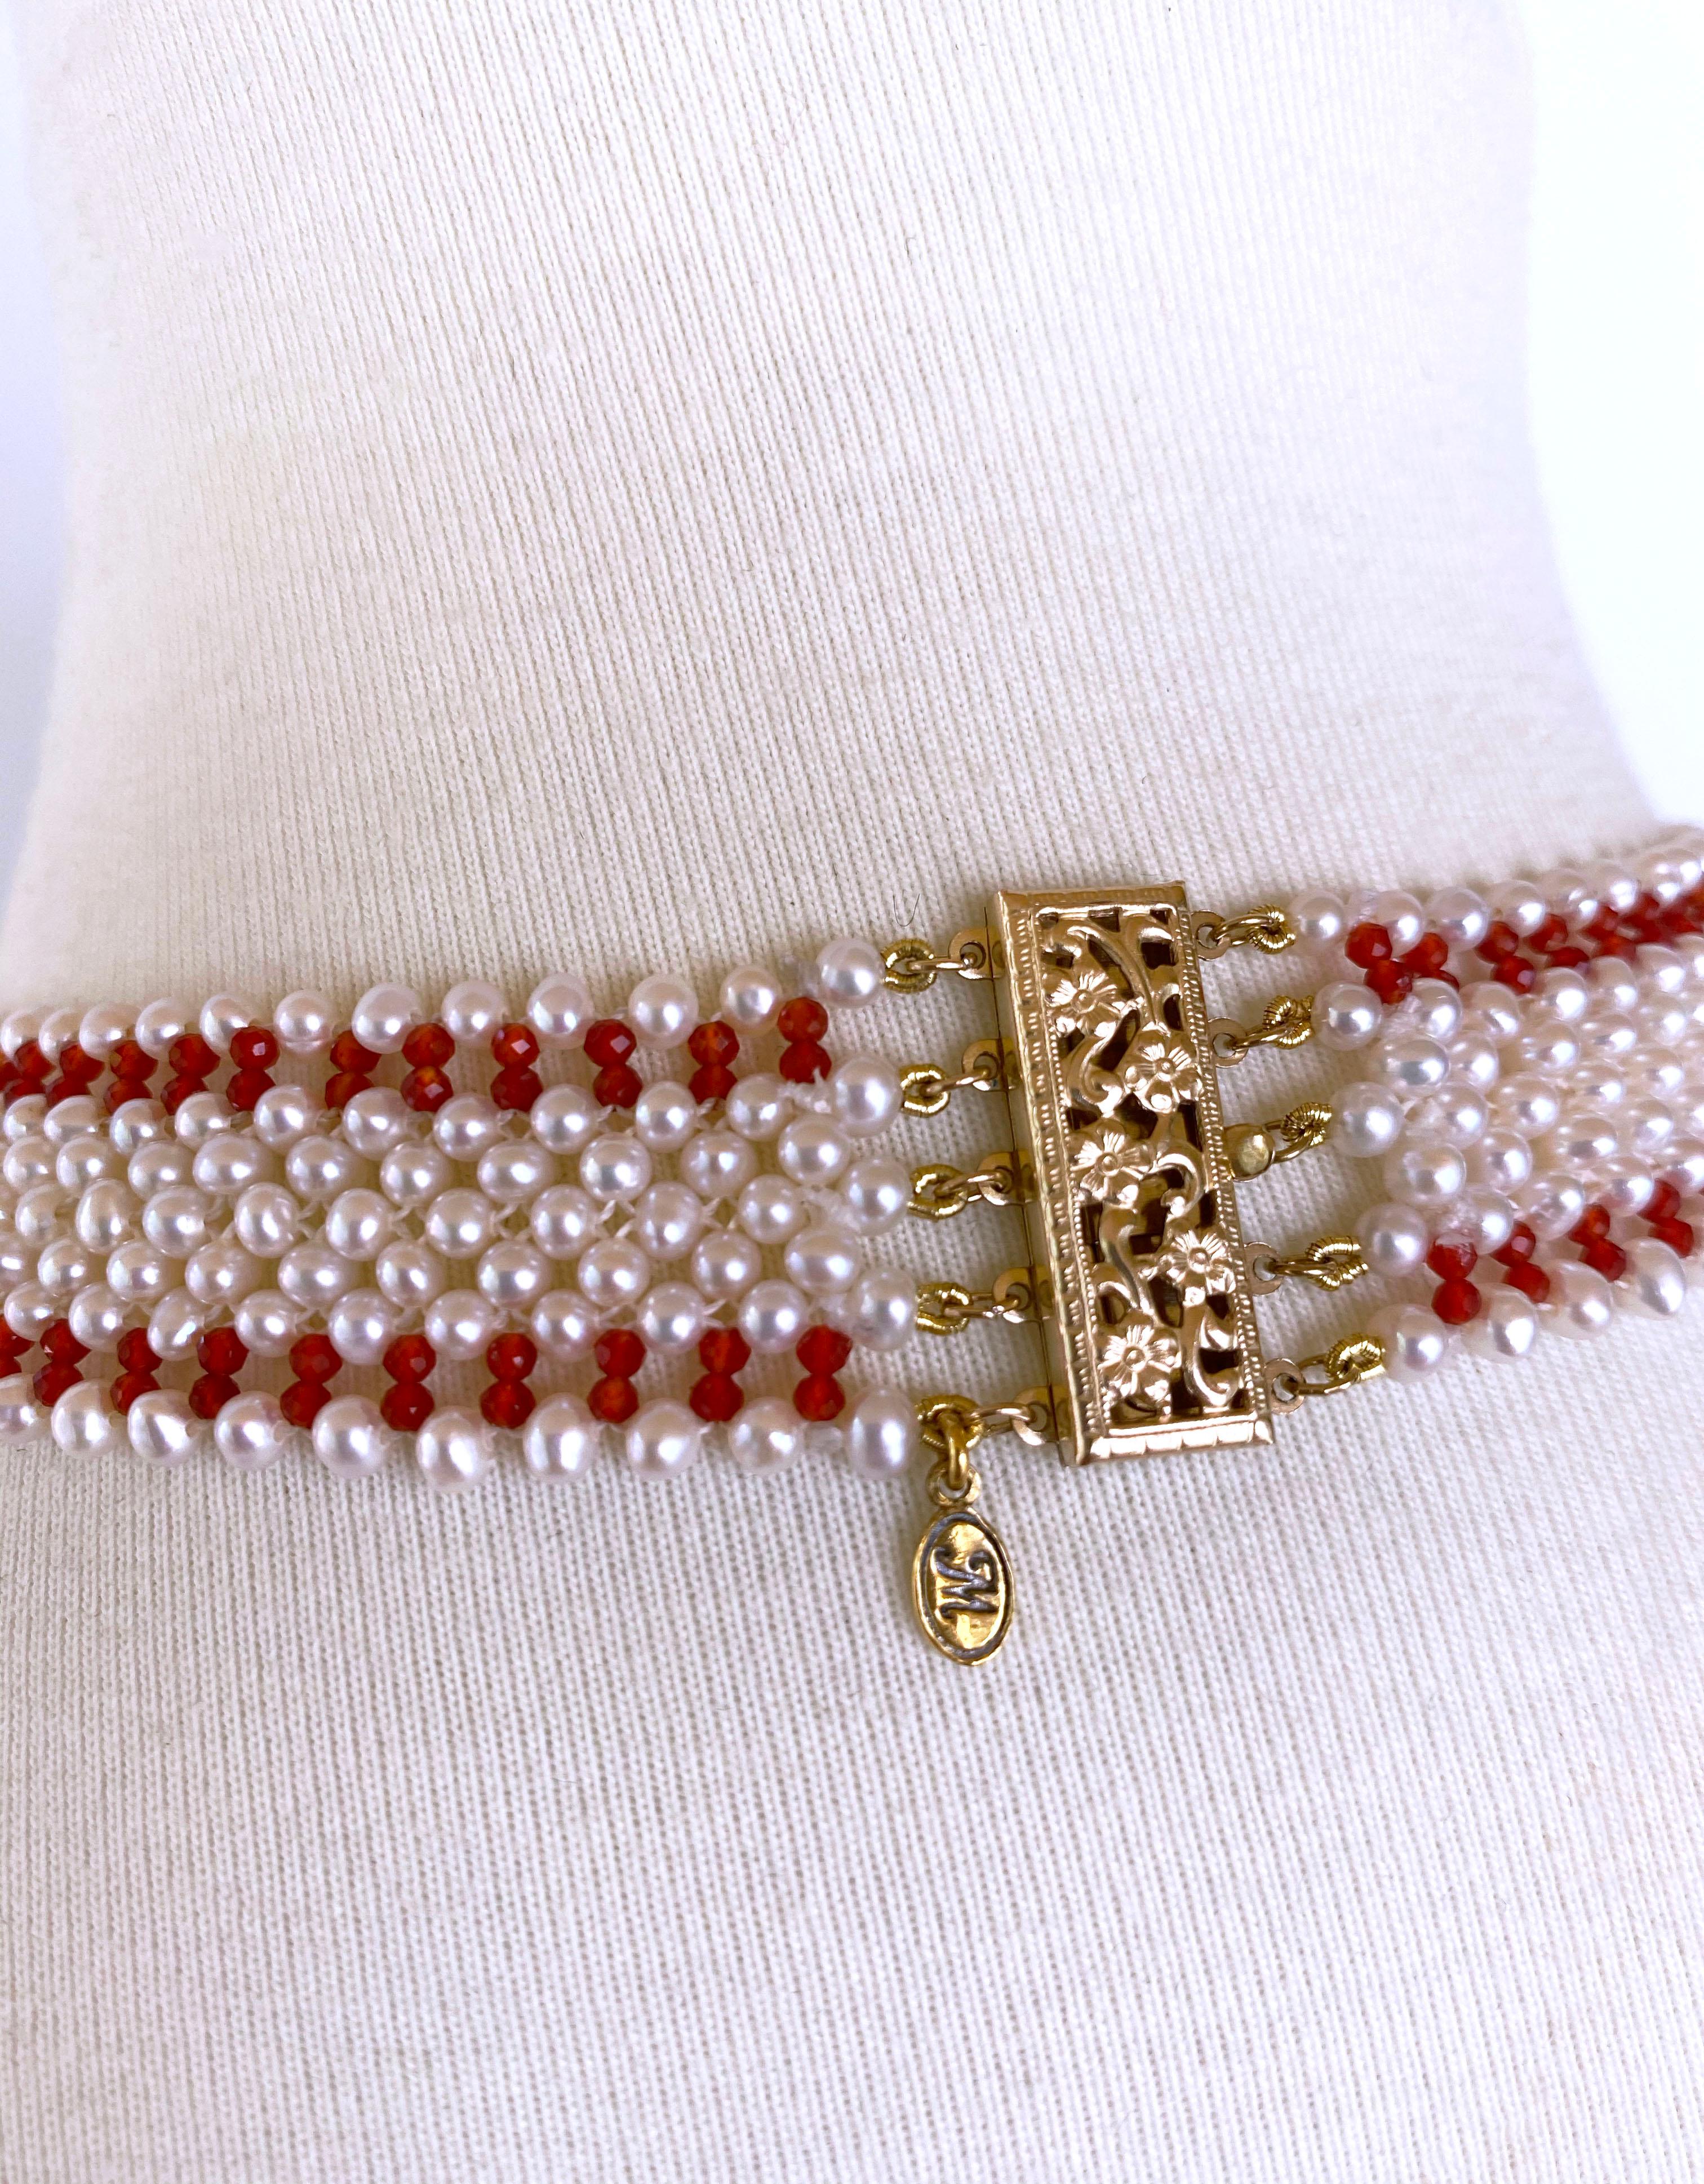 Artisan Marina J. Woven Pearl and Carnelian Necklace with Mosaic Centerpiece and Coral